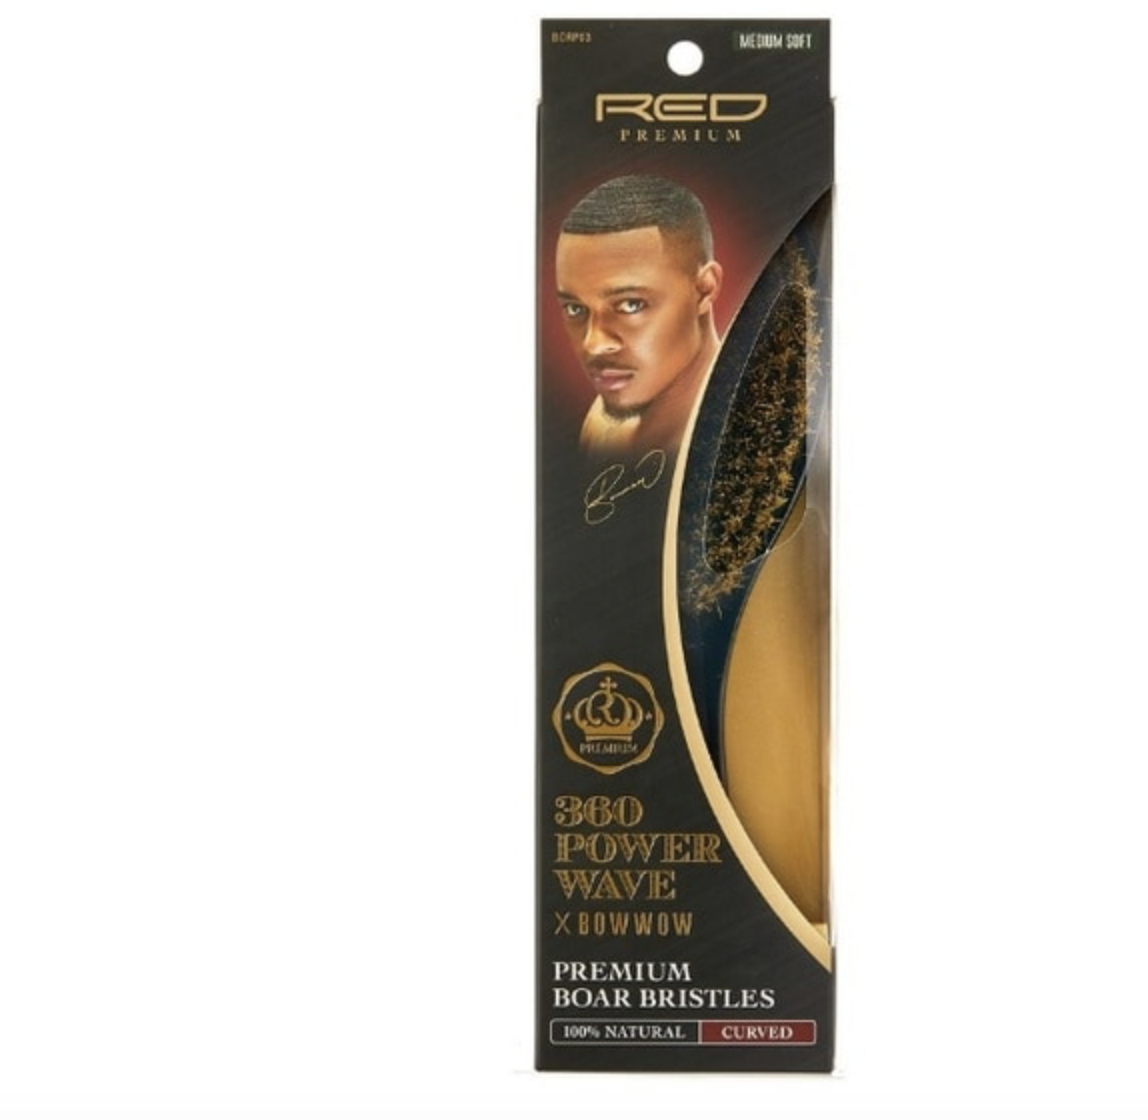 RED Premium | 360 Power Wave X Bow Wow Brush  (Medium Soft)  Curved WAVE #BORP03 - BPolished Beauty Supply